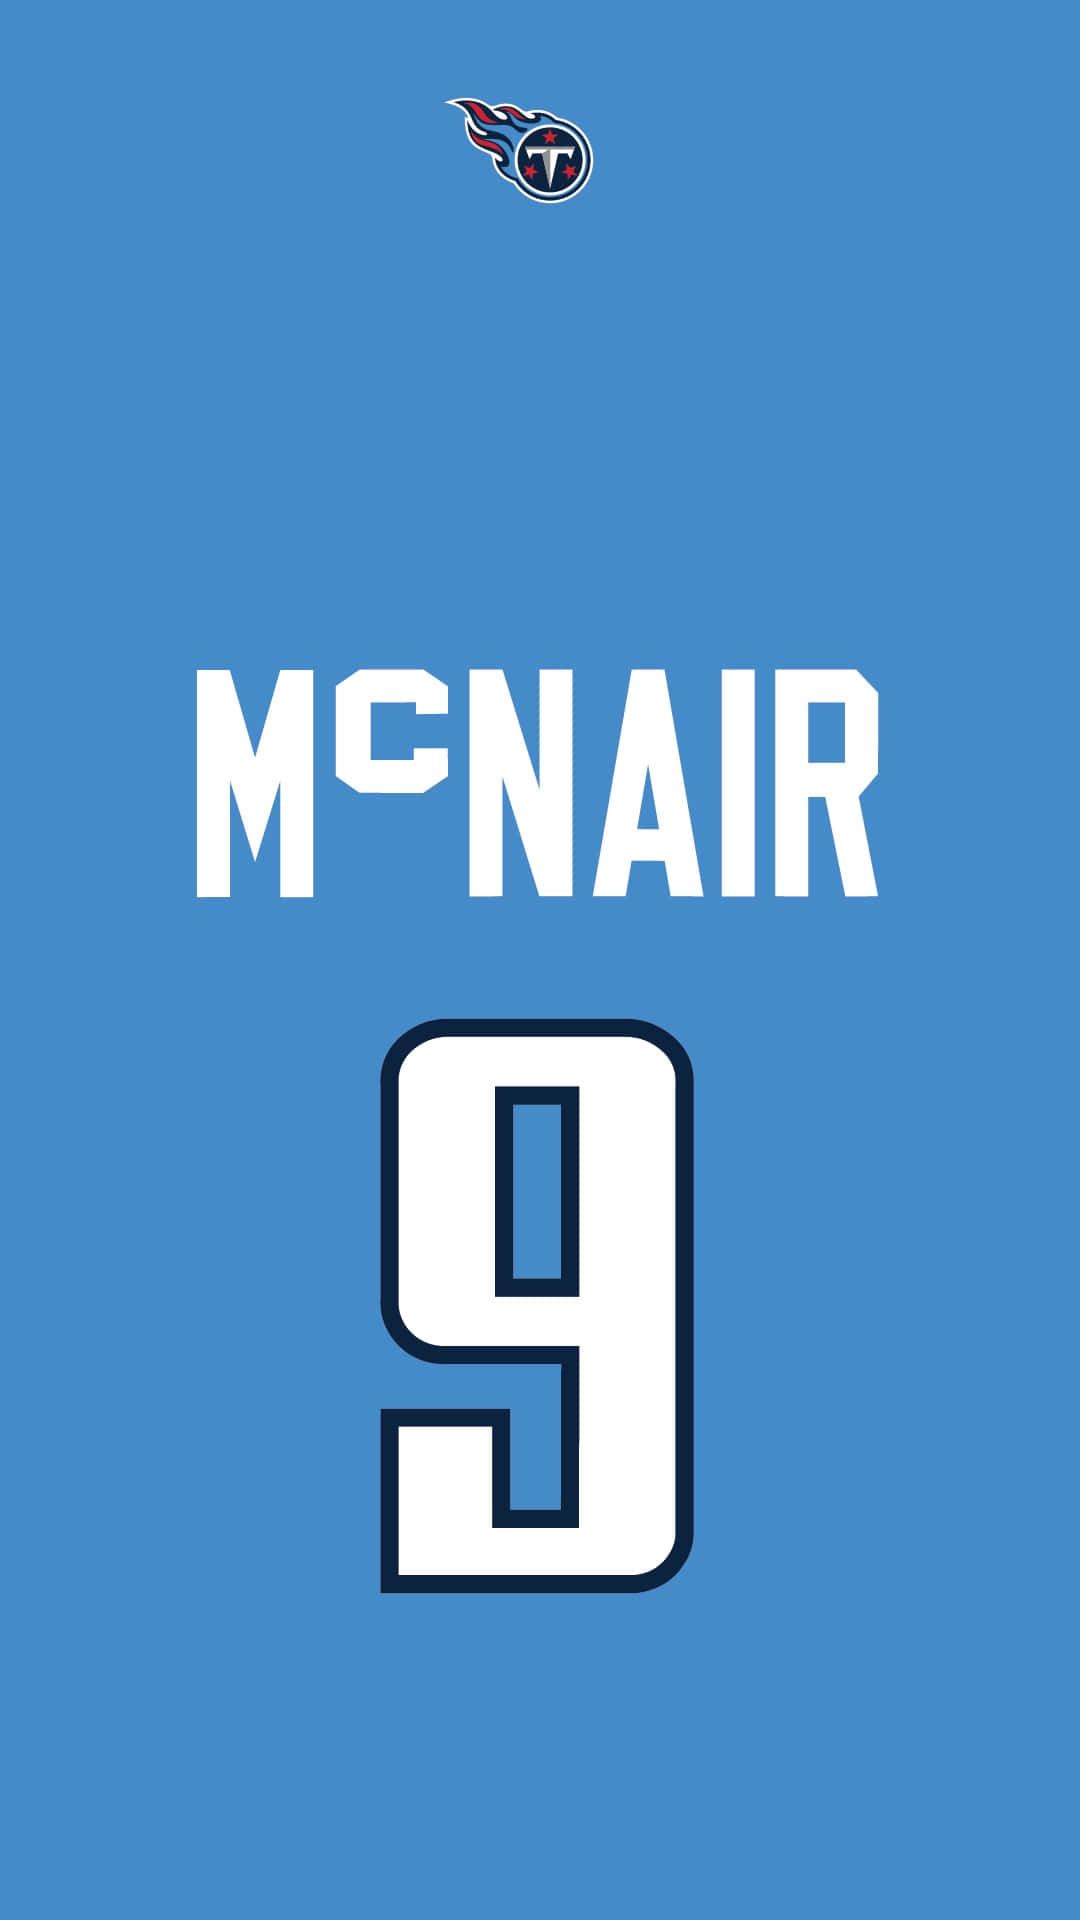 Mcnair 9 Tennessee Titans Jersey Wallpaper